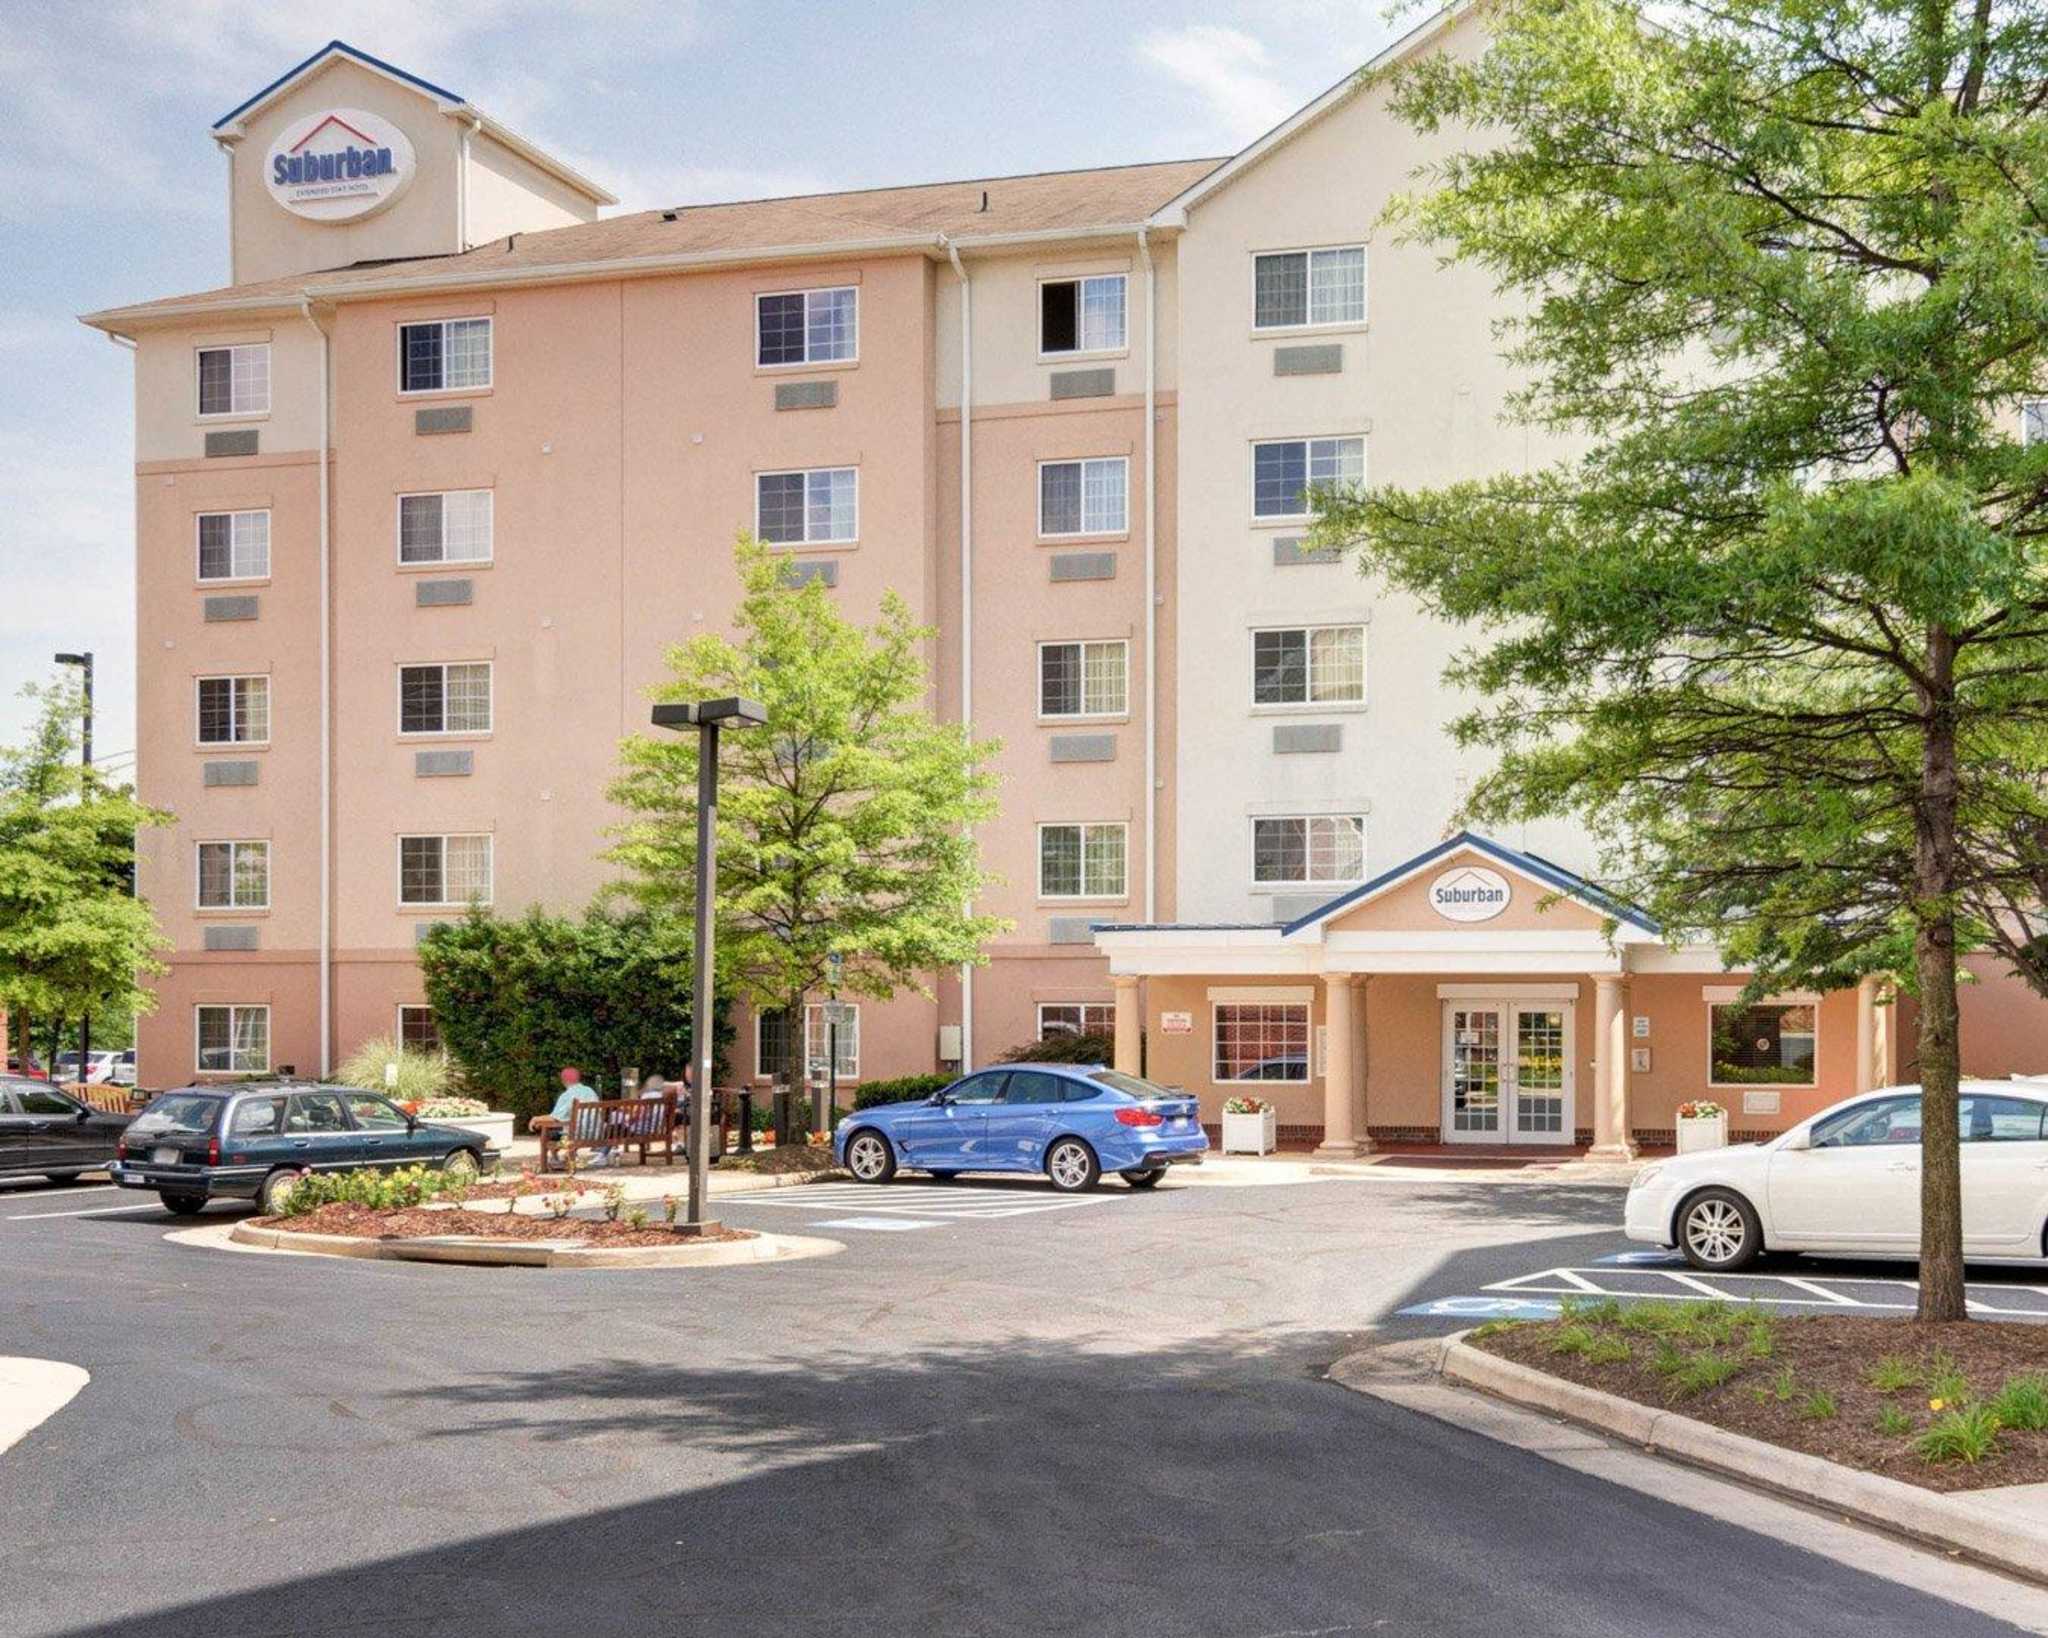 Discount [75% Off] Suburban Extended Stay Hotel Near Fort Bragg United States - Hotel Near Me ...